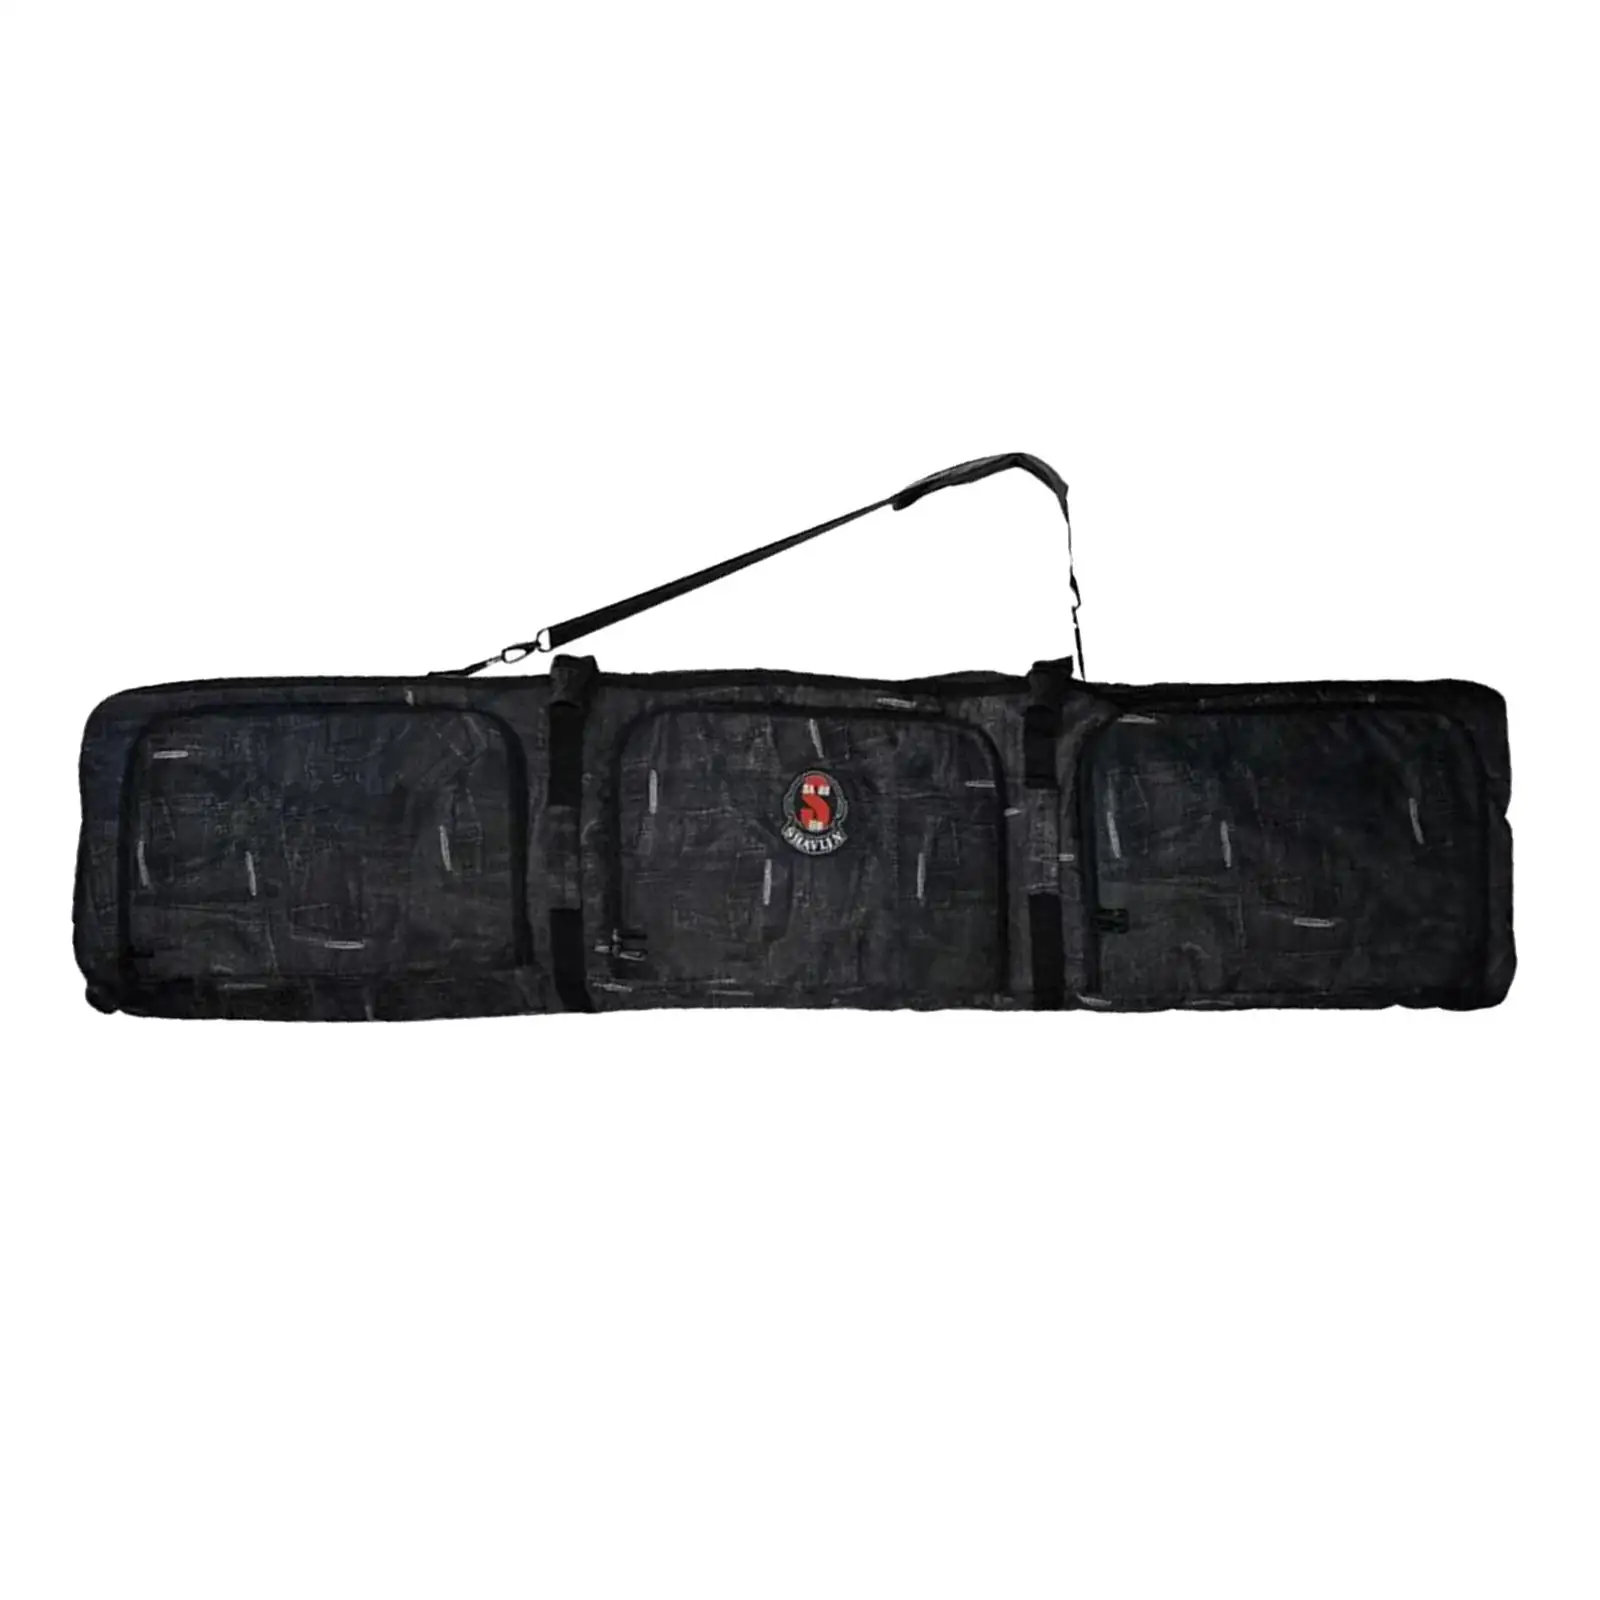 Snowboard Bag with Wheels Ski Storage Bag Carrying Bag with Handle Suitcase for